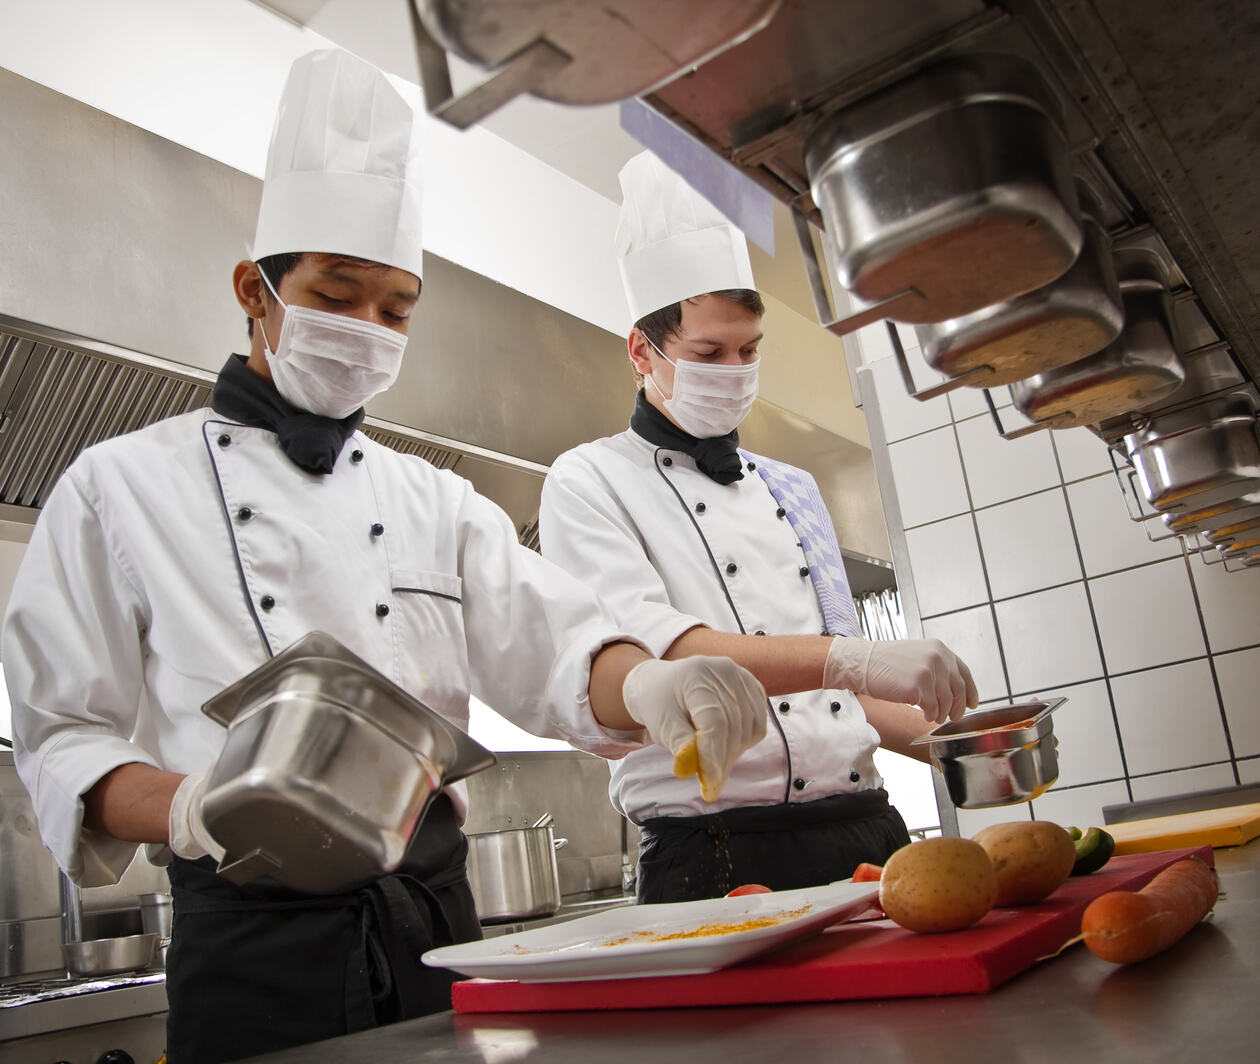 The Importance of Food Safety: How Proper Food Handling and Preparation Can Protect Consumers and Ensure Business Success